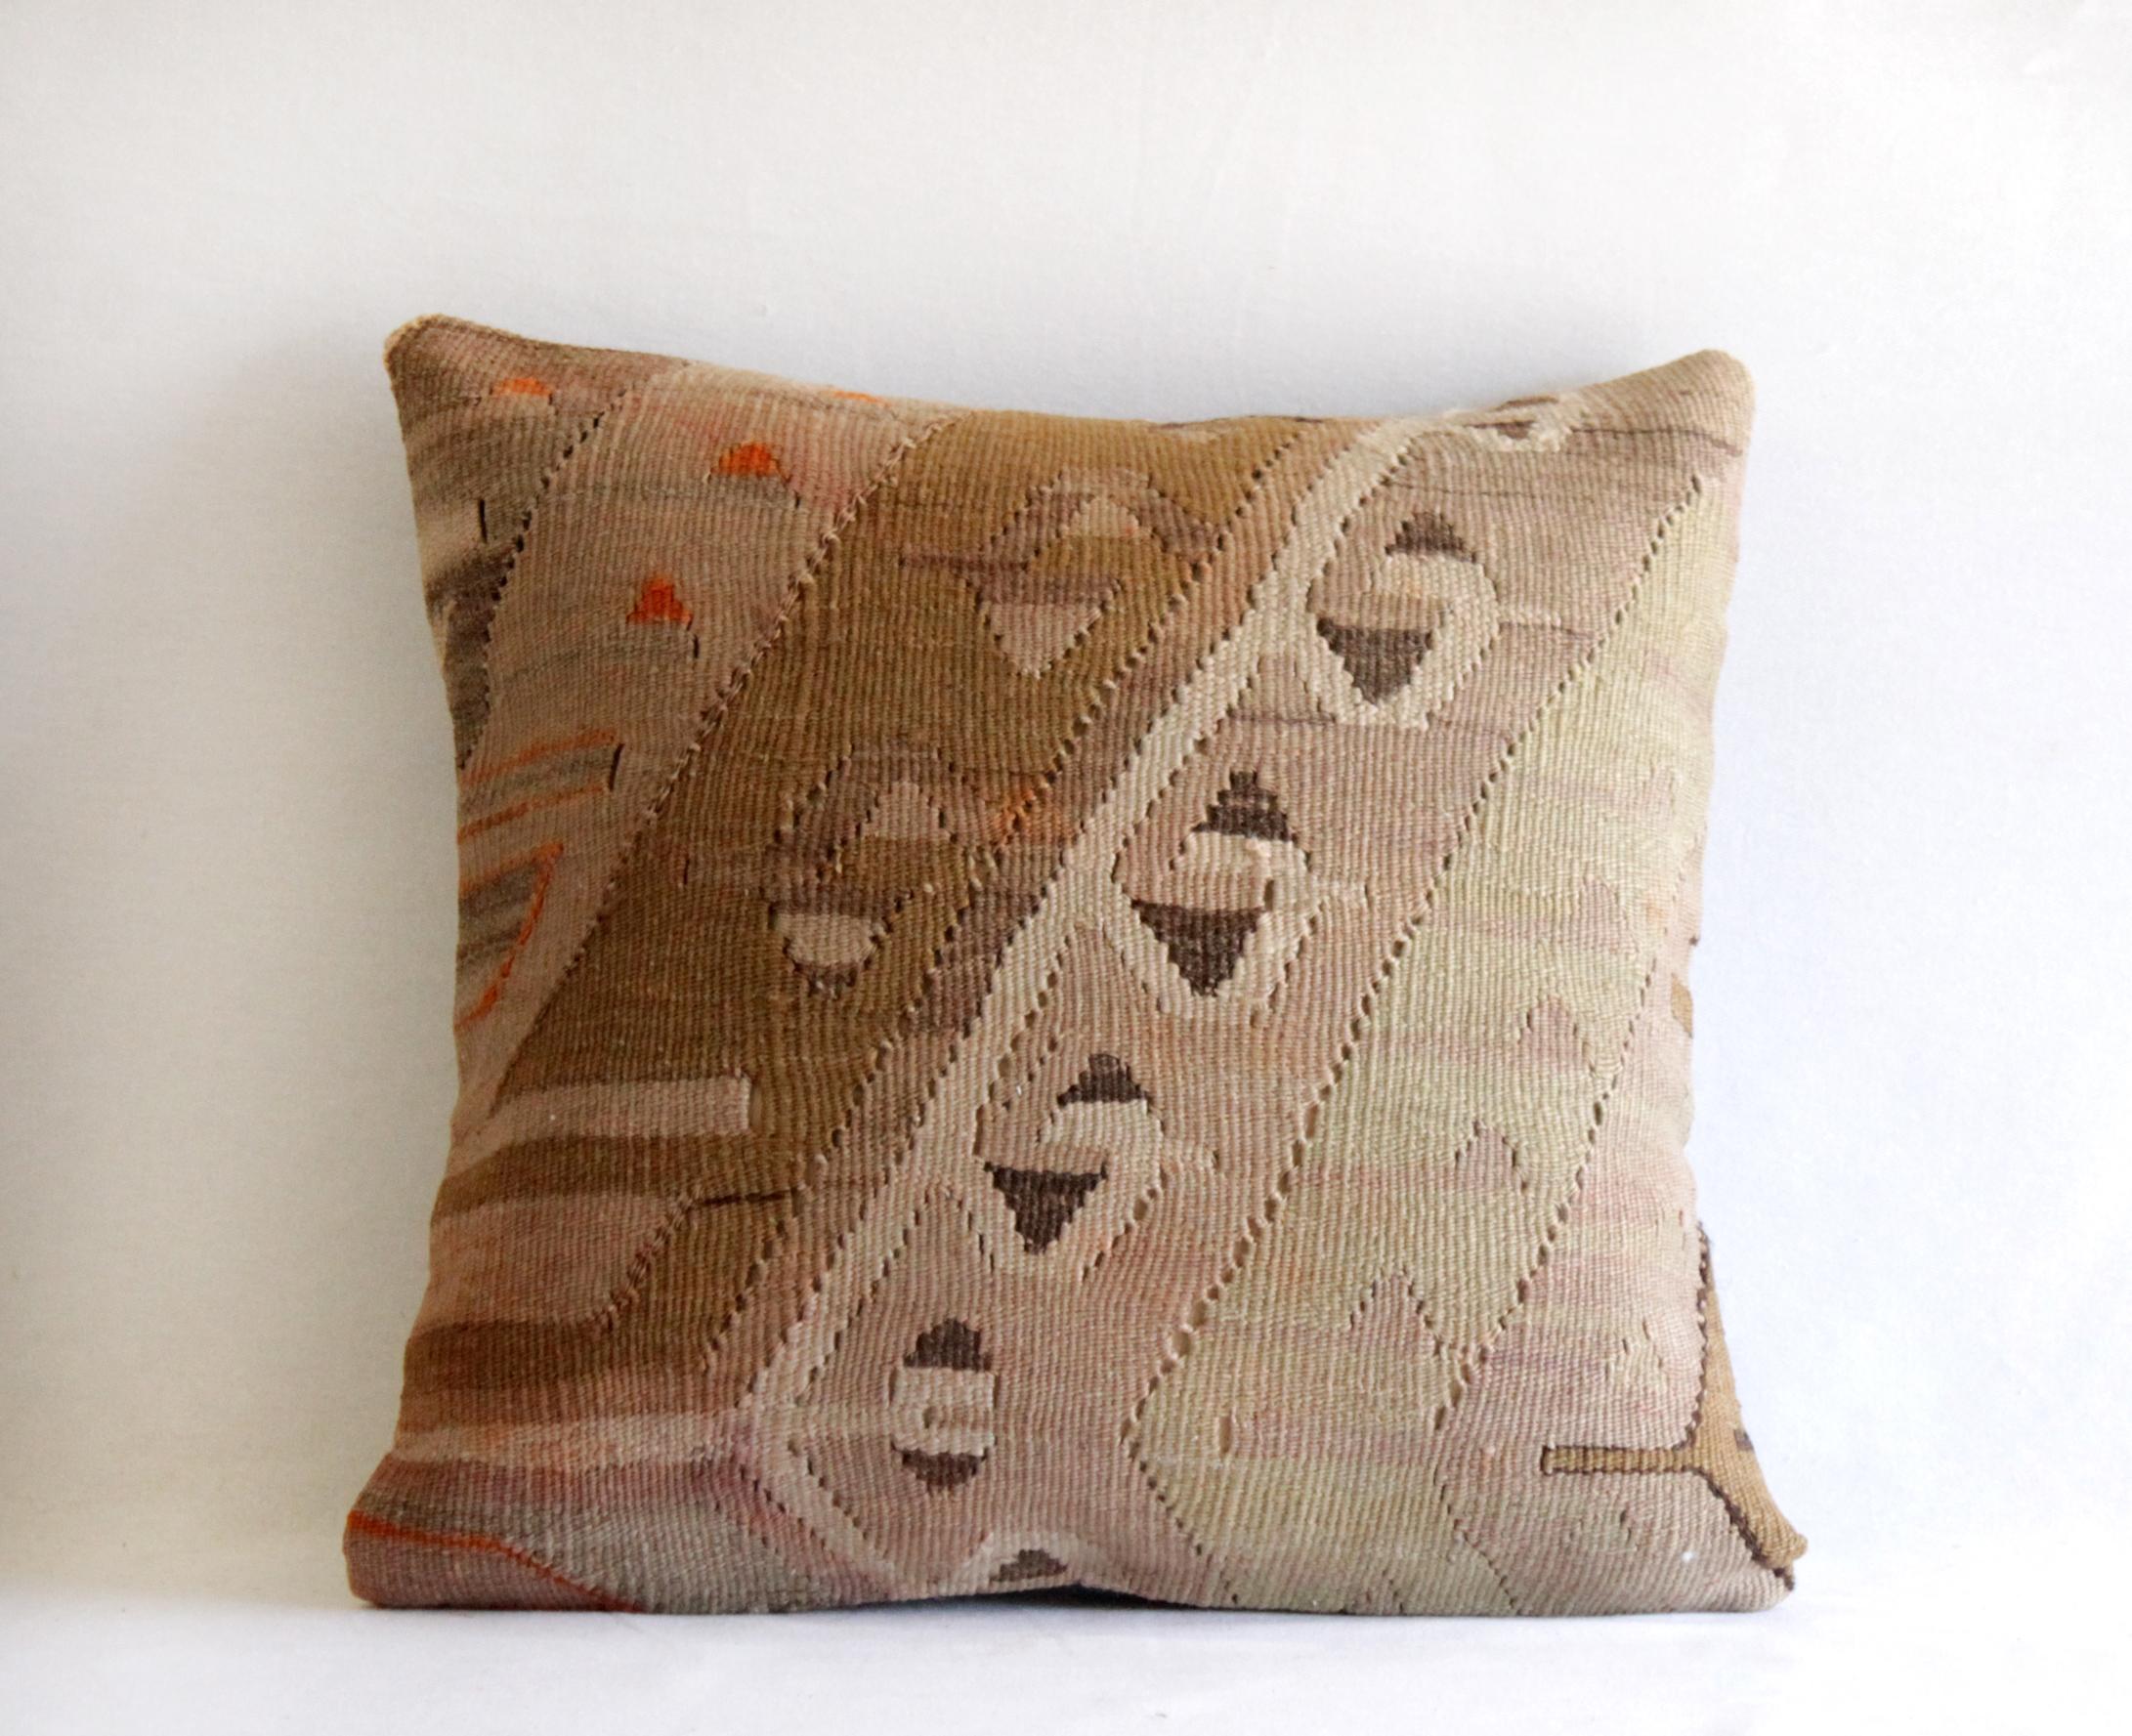 Vintage Turkish Kilim rug accent pillow
Pretty blush and nude tones with brown accents. Tiny pops of a burnt orange color, finished with a grey canvas backing, and hidden zipper closure.
Measures: 15.5